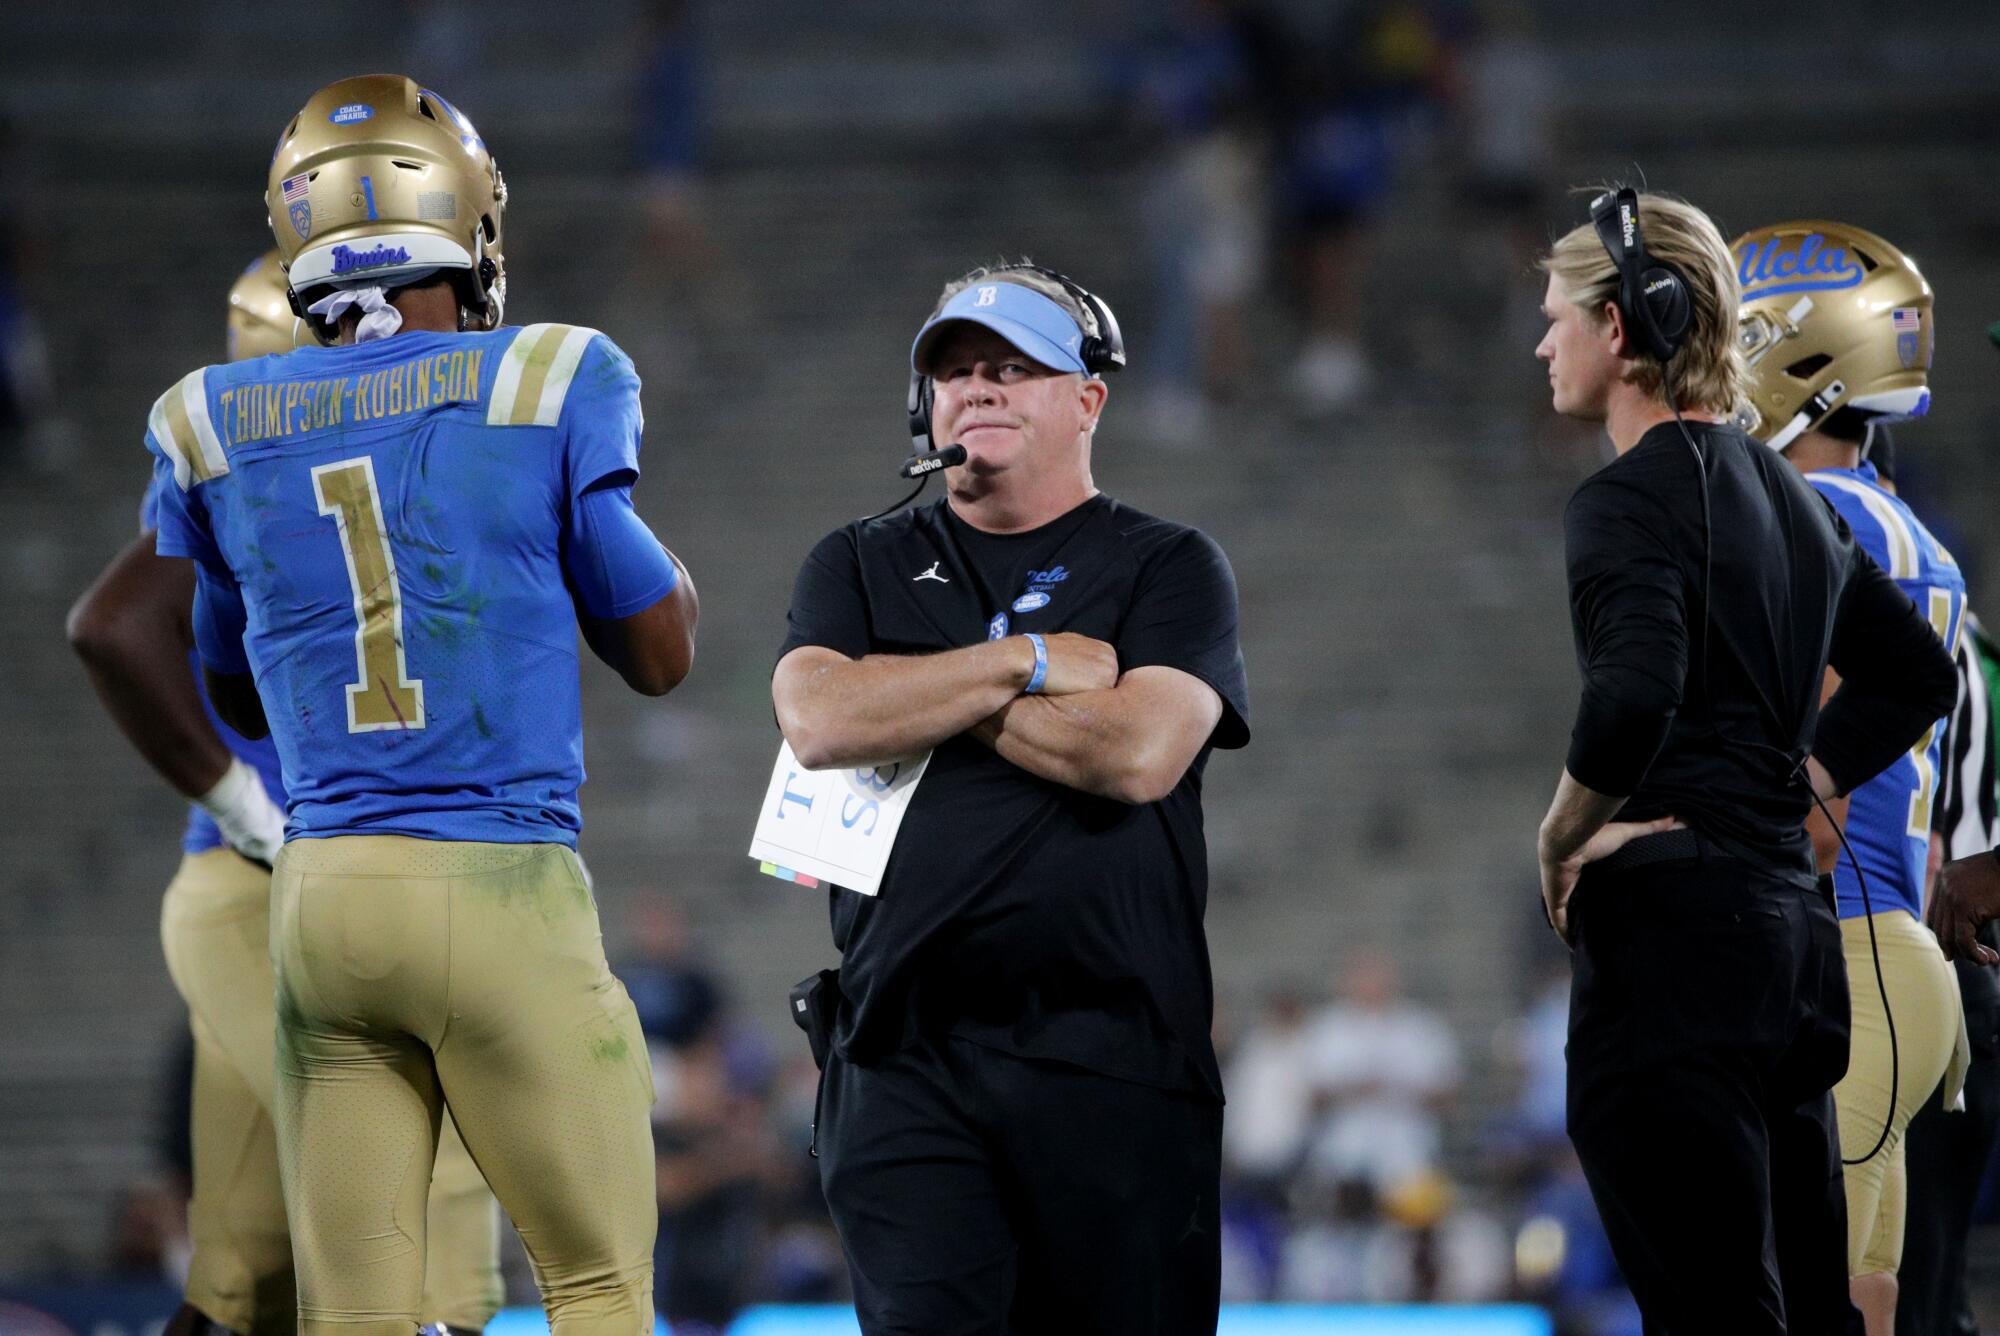 UCLA coach Chip Kelly looks at the scoreboard as he stands next to quarterback Dorian Thompson-Robinson.